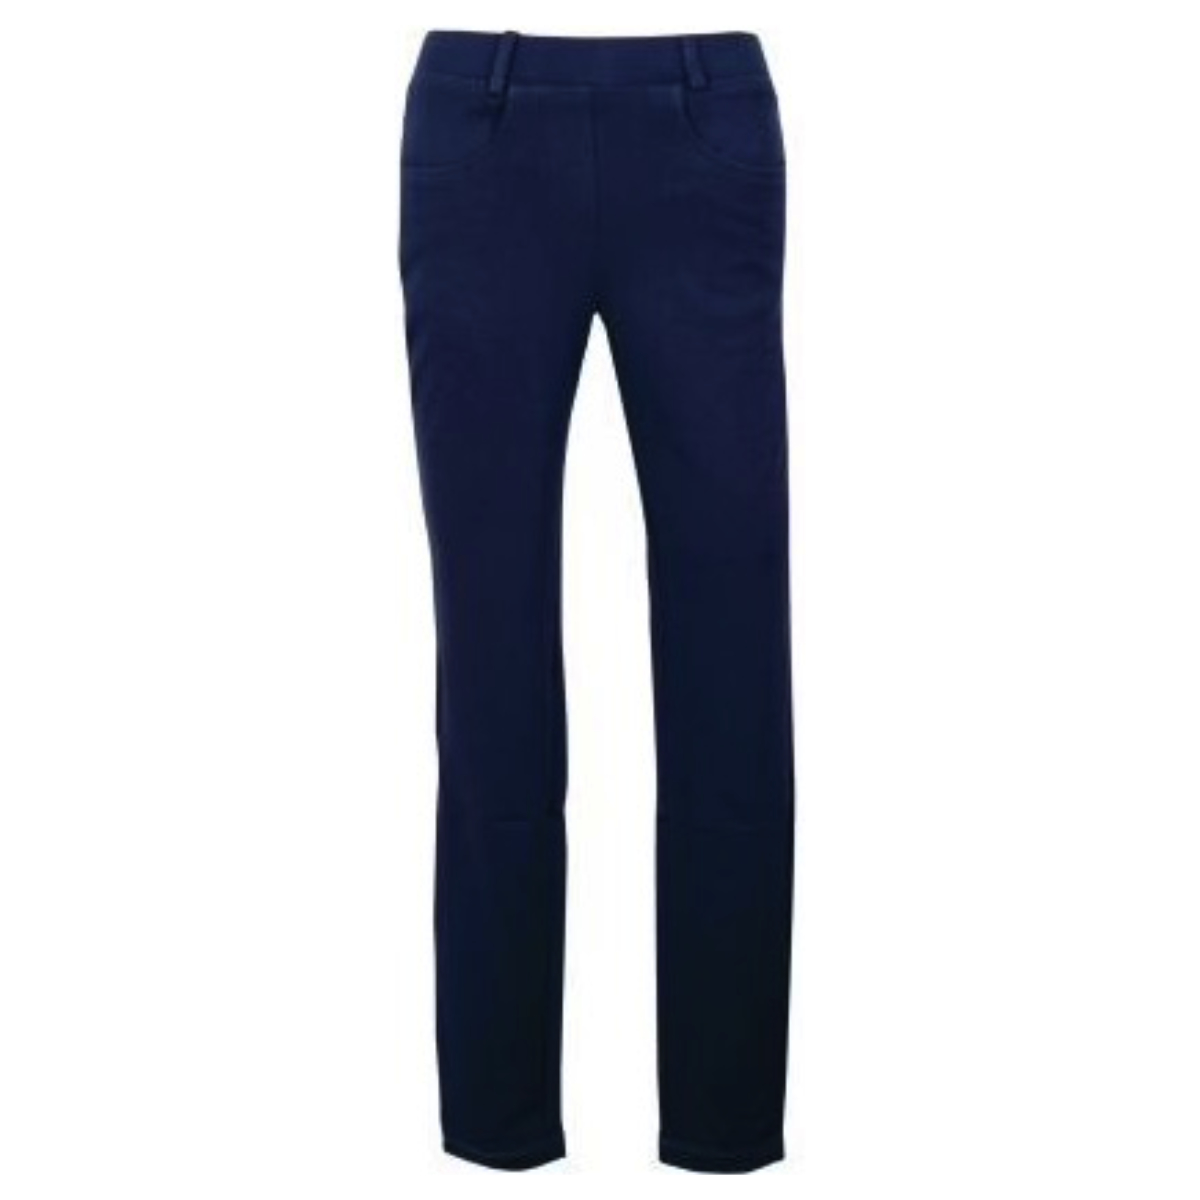 Cherie Collection Comfy Fit Pant Navy